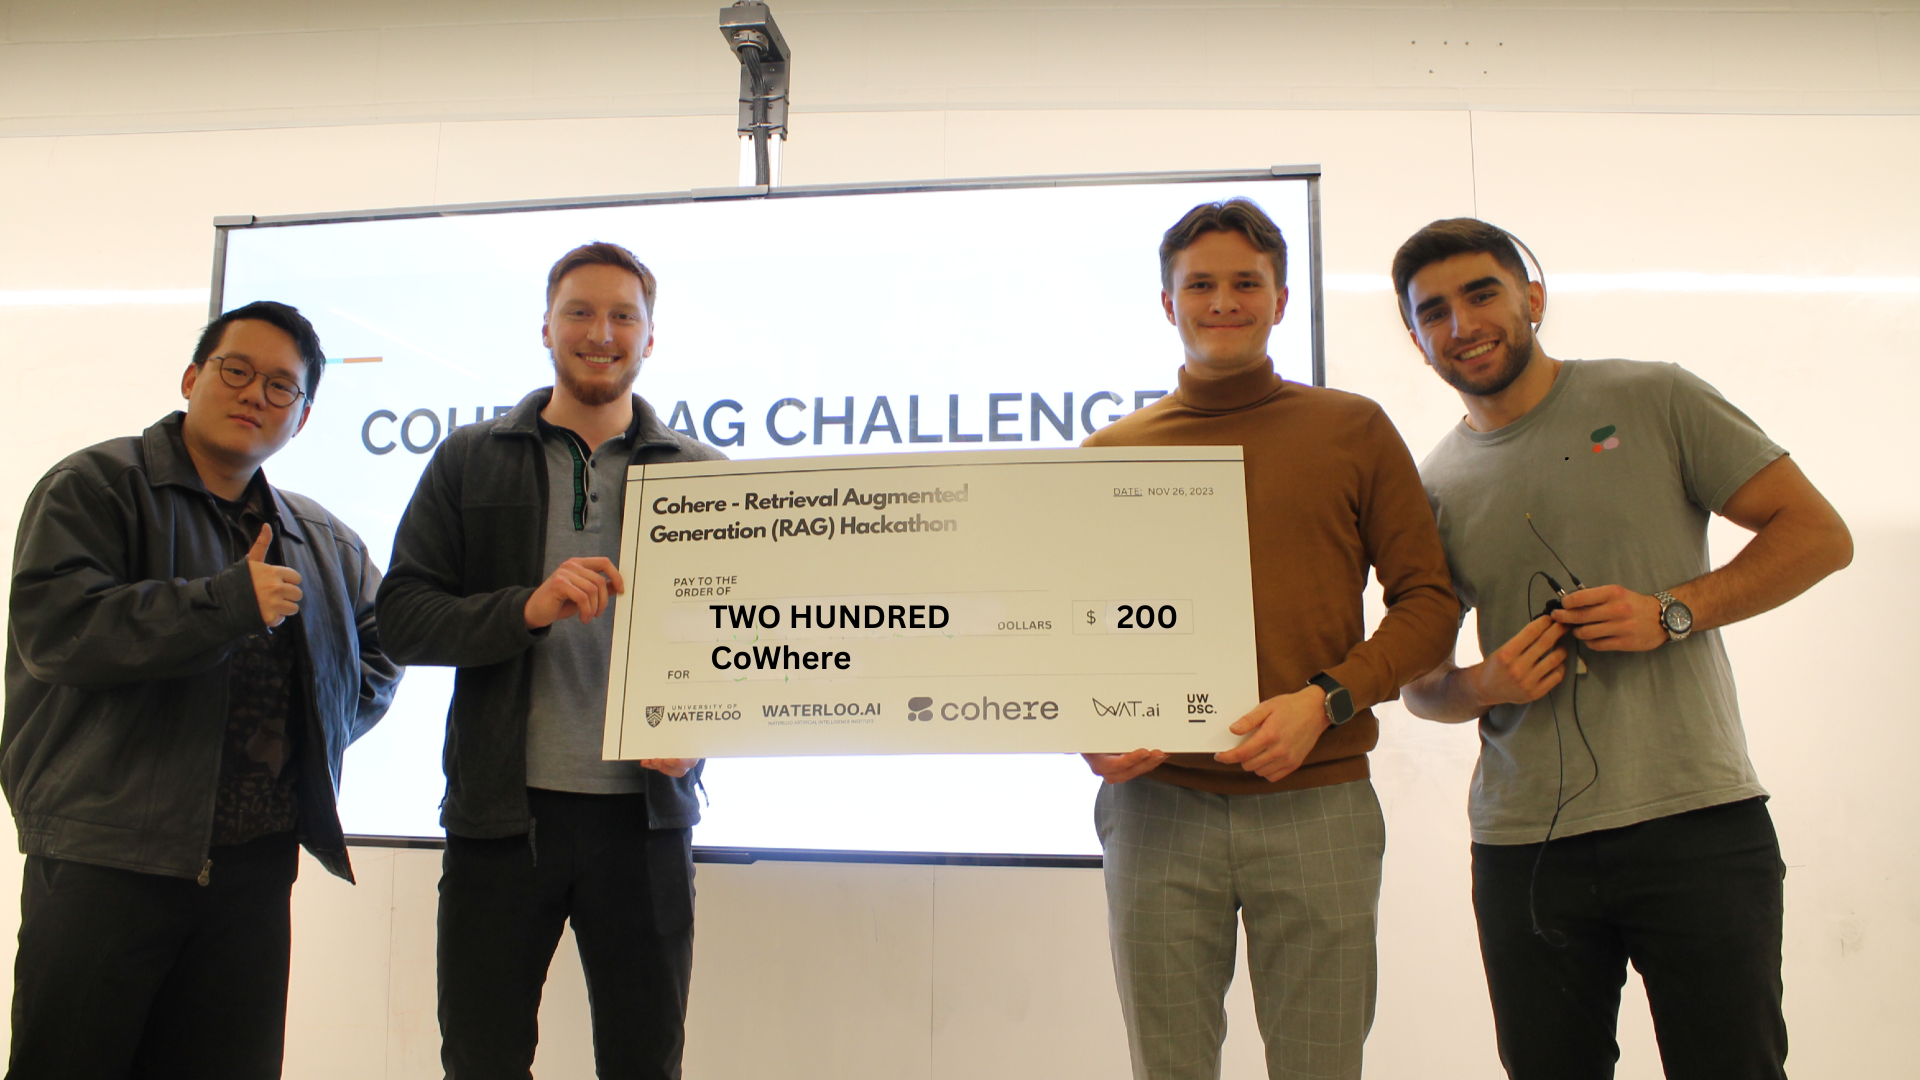 The CoWhere team (L-R: Marko Renic and Michael Solodko) holding a $200 cheque, flanked by Ivan Zhang and Faraz Khoubsirat